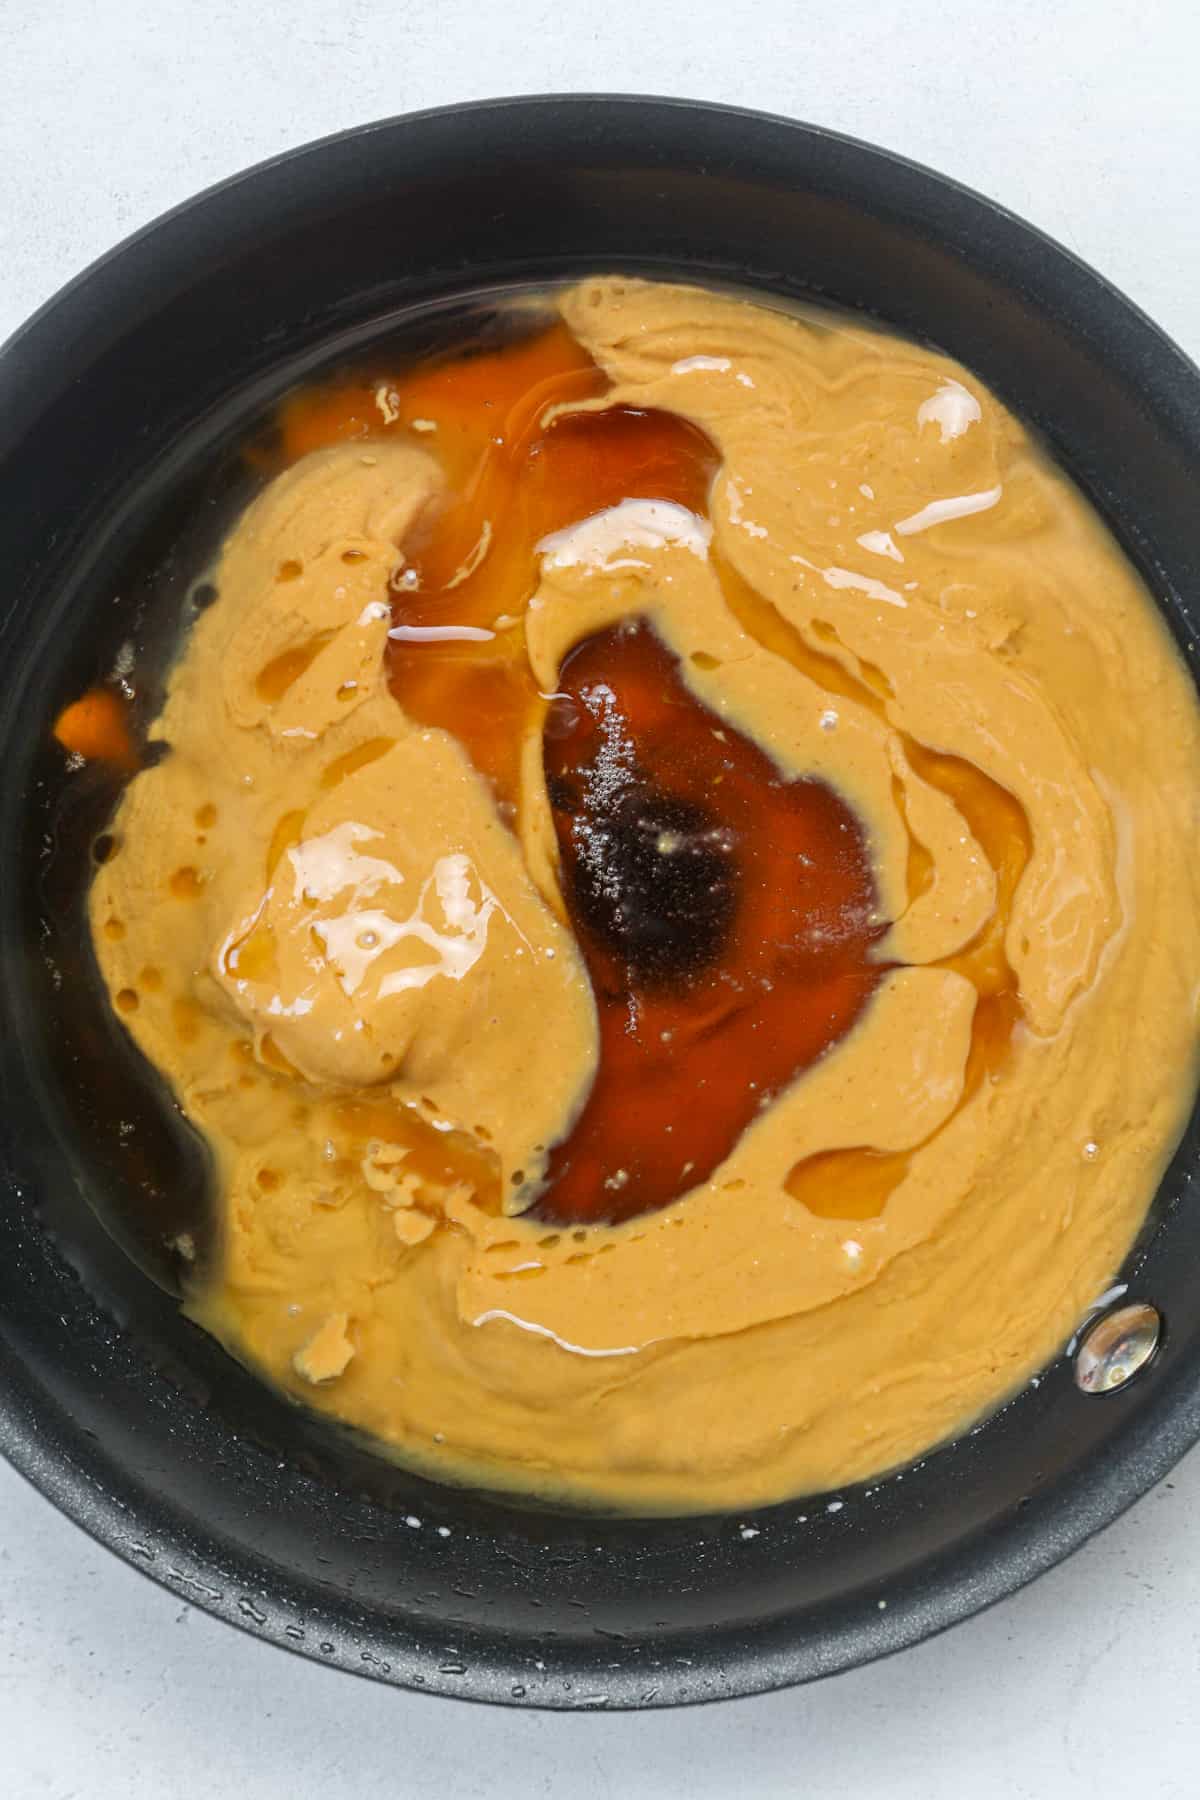 Peanut butter and syrup in skillet.